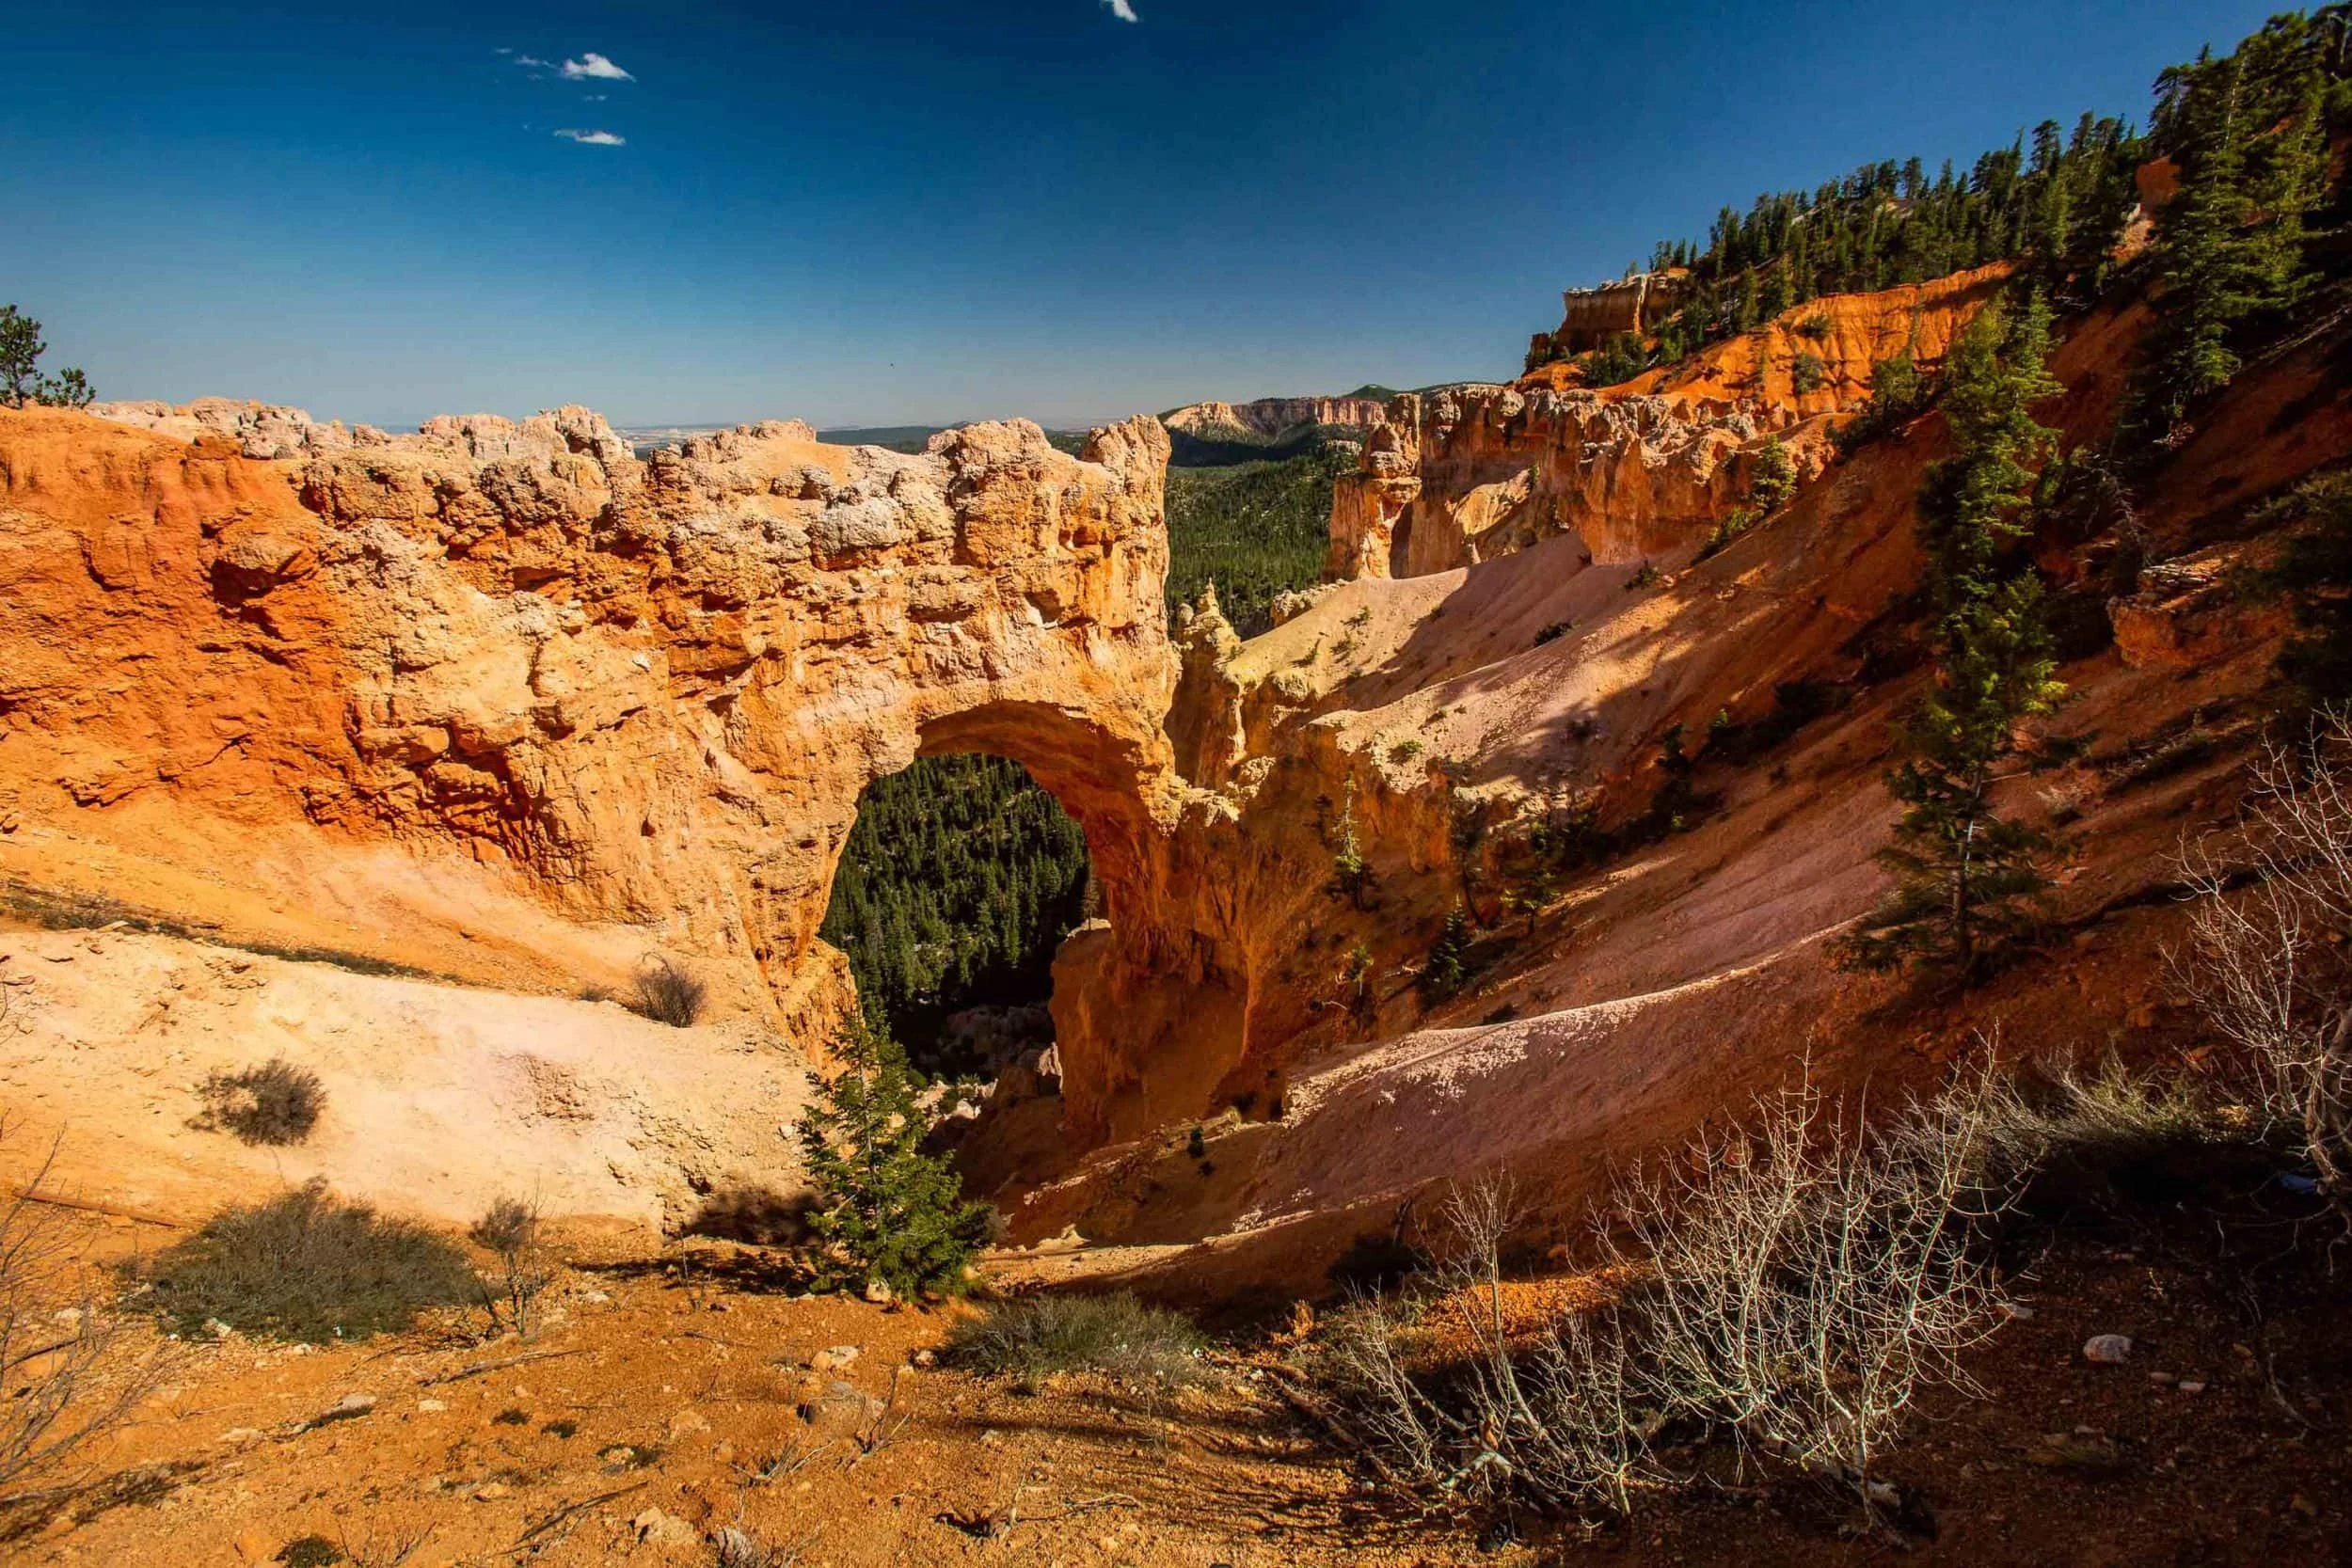 The natural bridge in Bryce Canyon National Park makes a great photo spot.